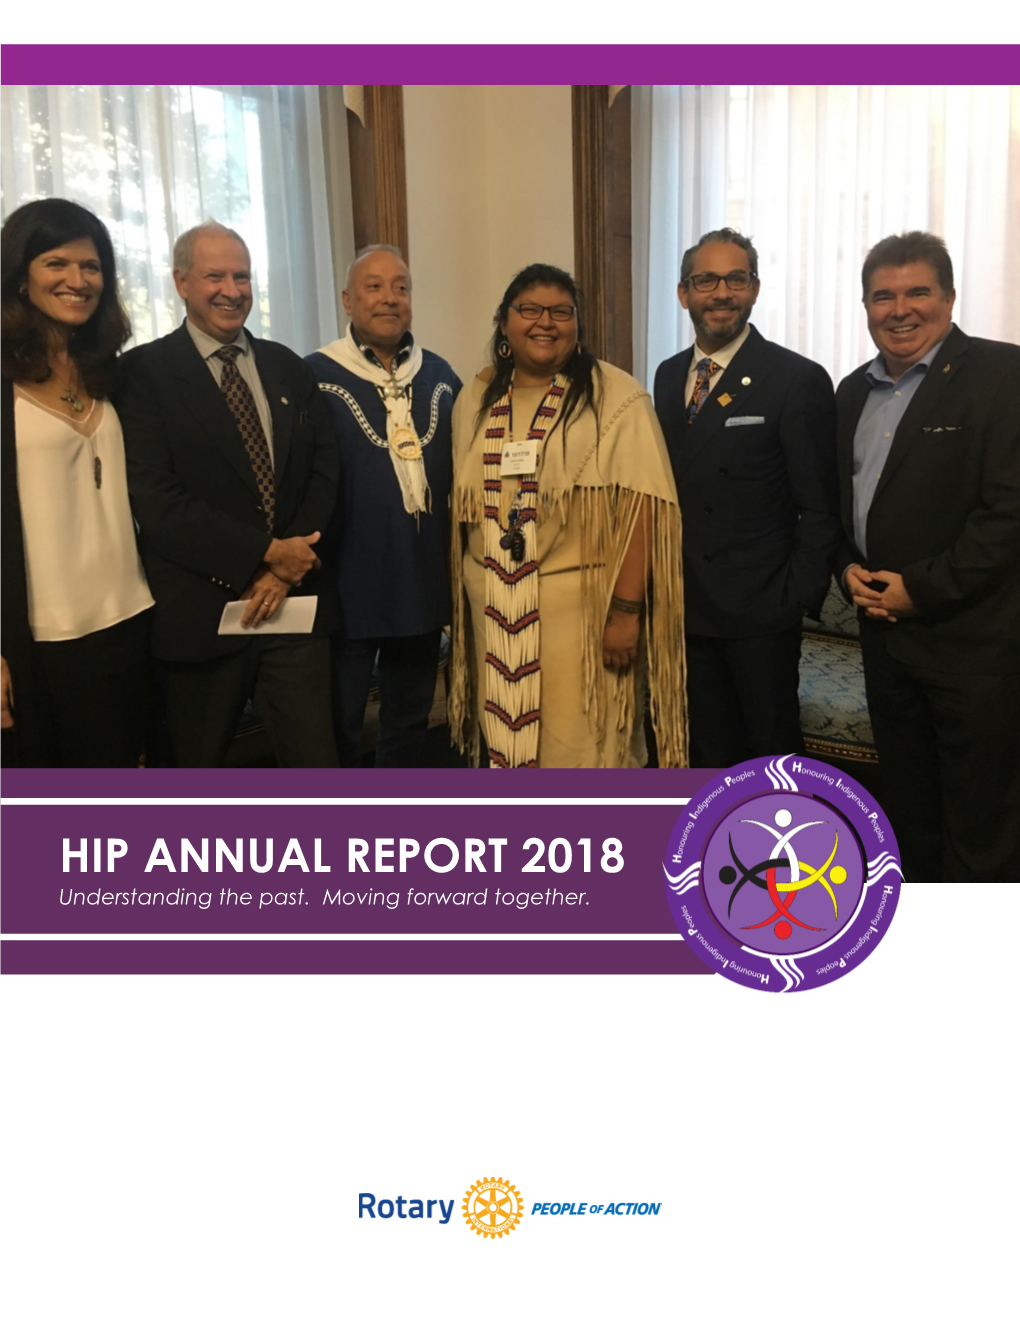 HIP ANNUAL REPORT 2018 Understanding the Past